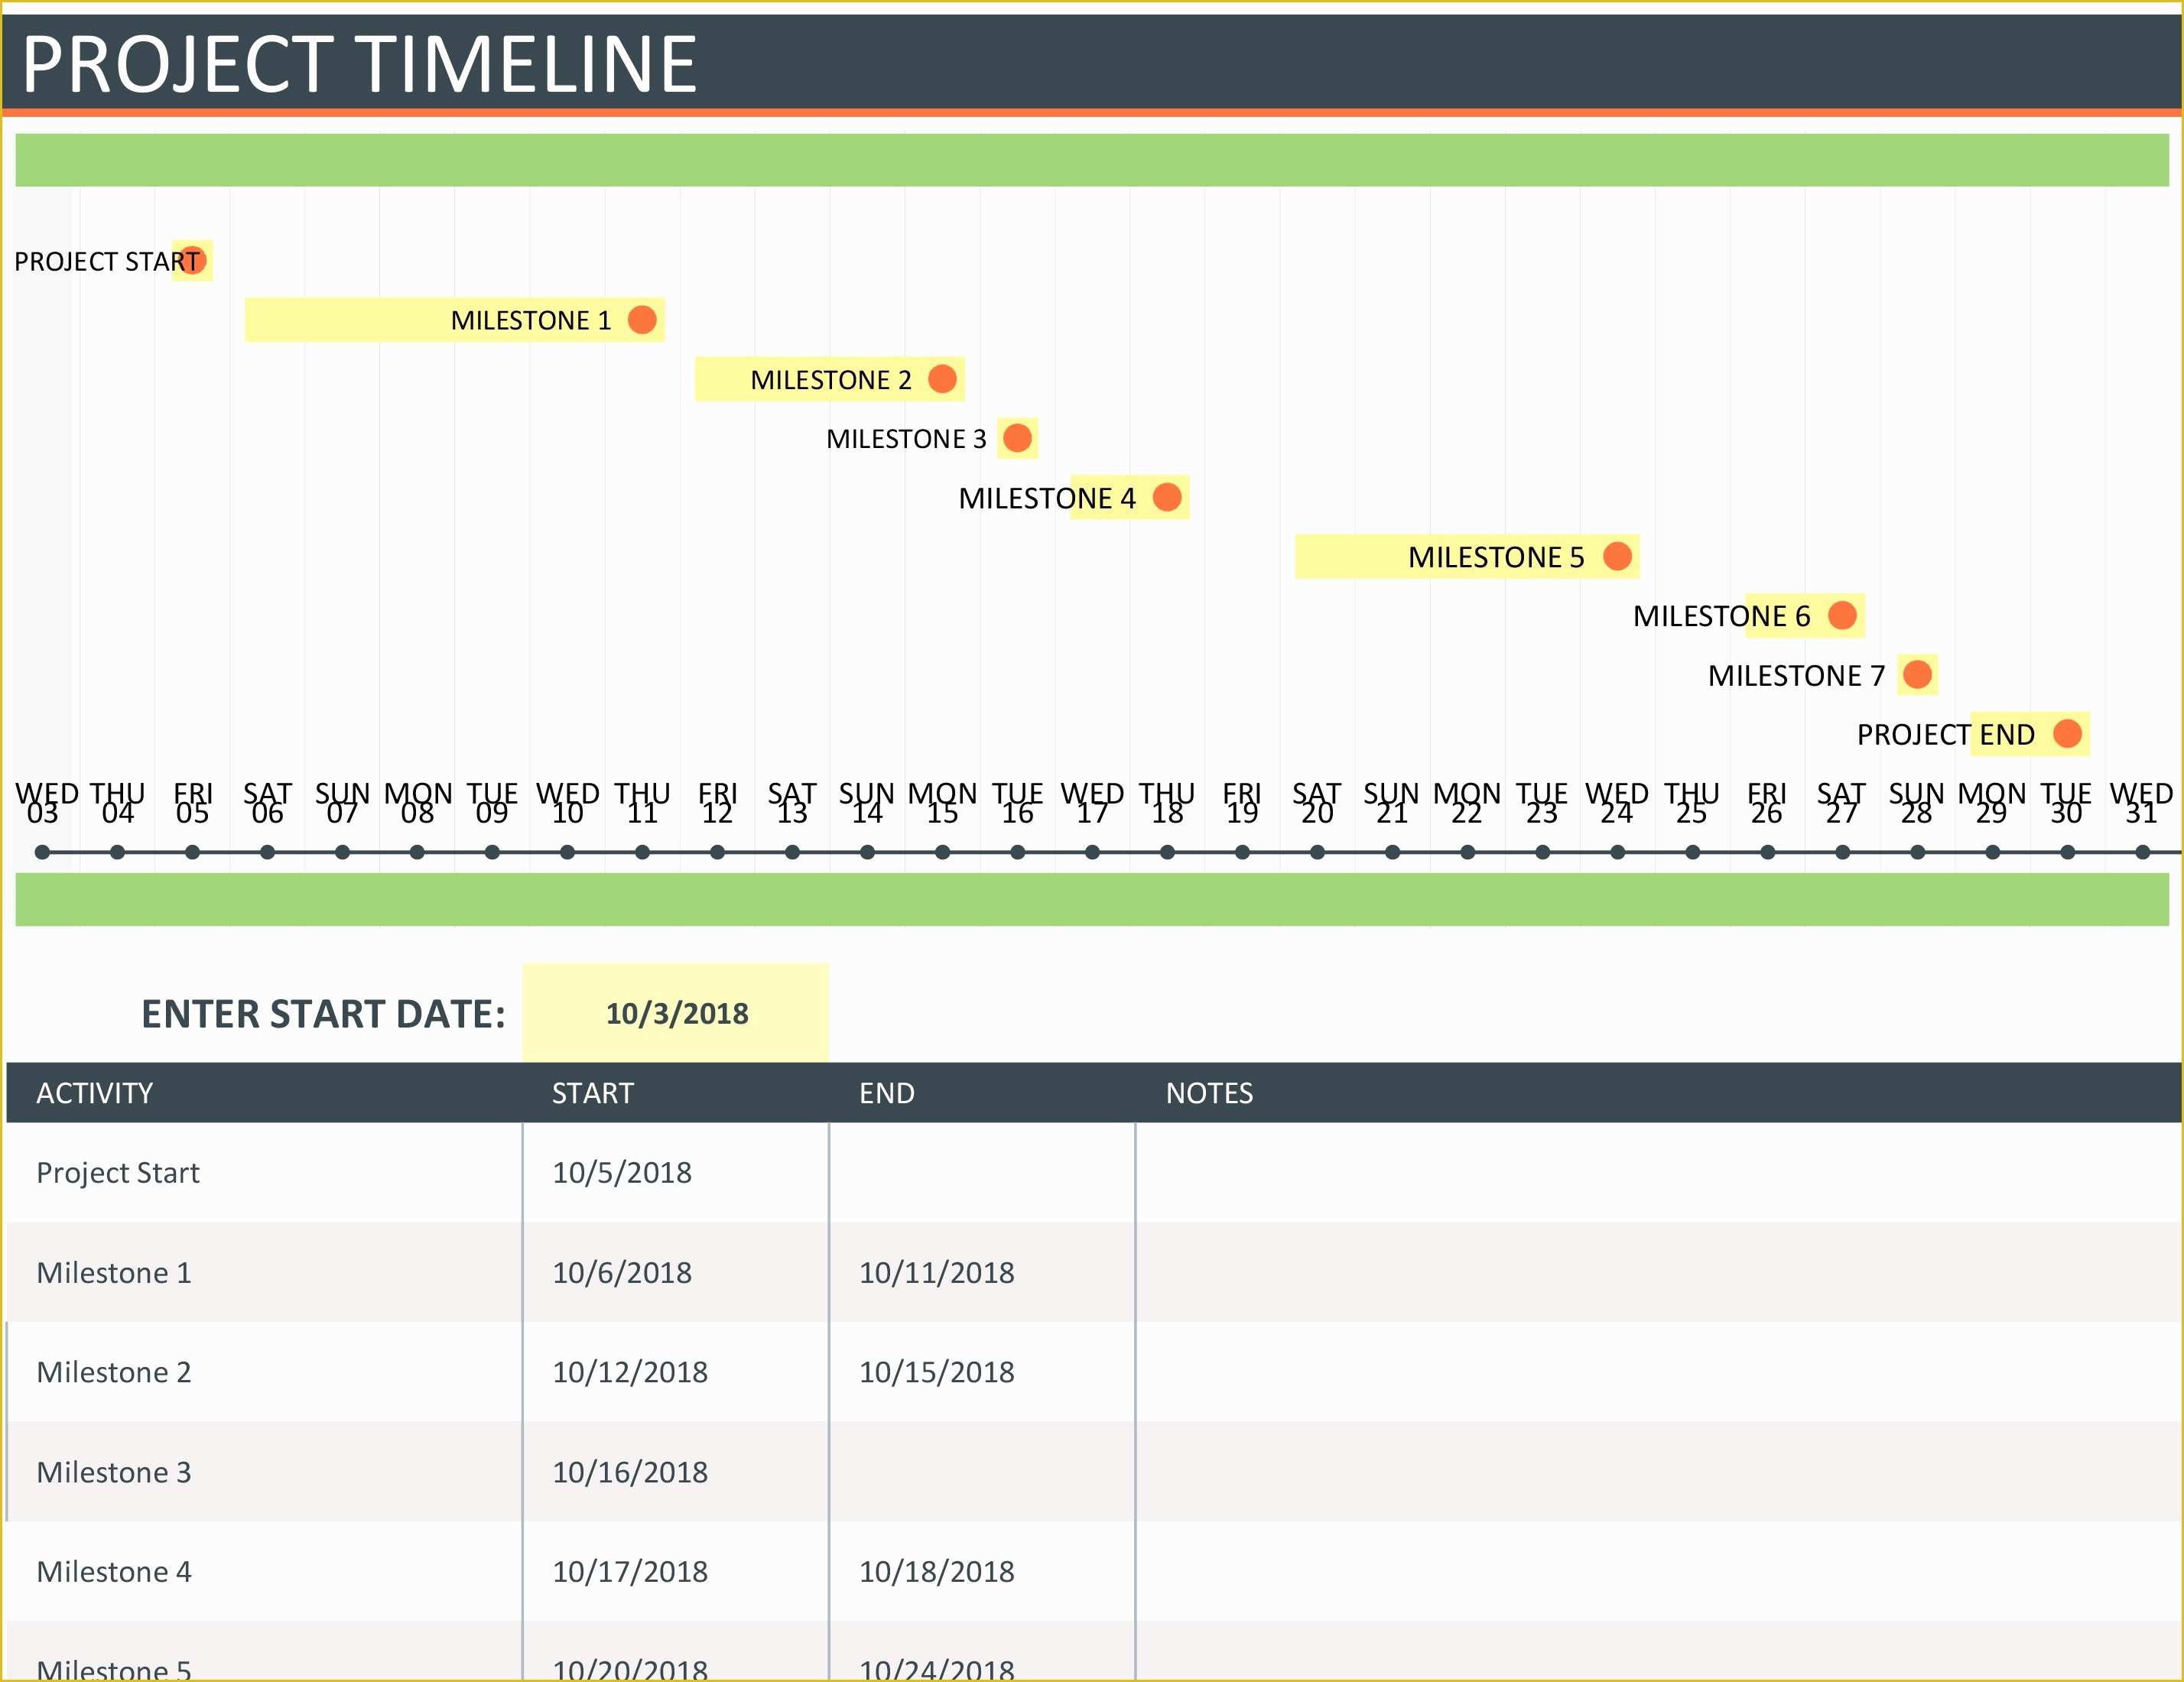 Free Microsoft Timeline Template Of Project Timeline with Milestones